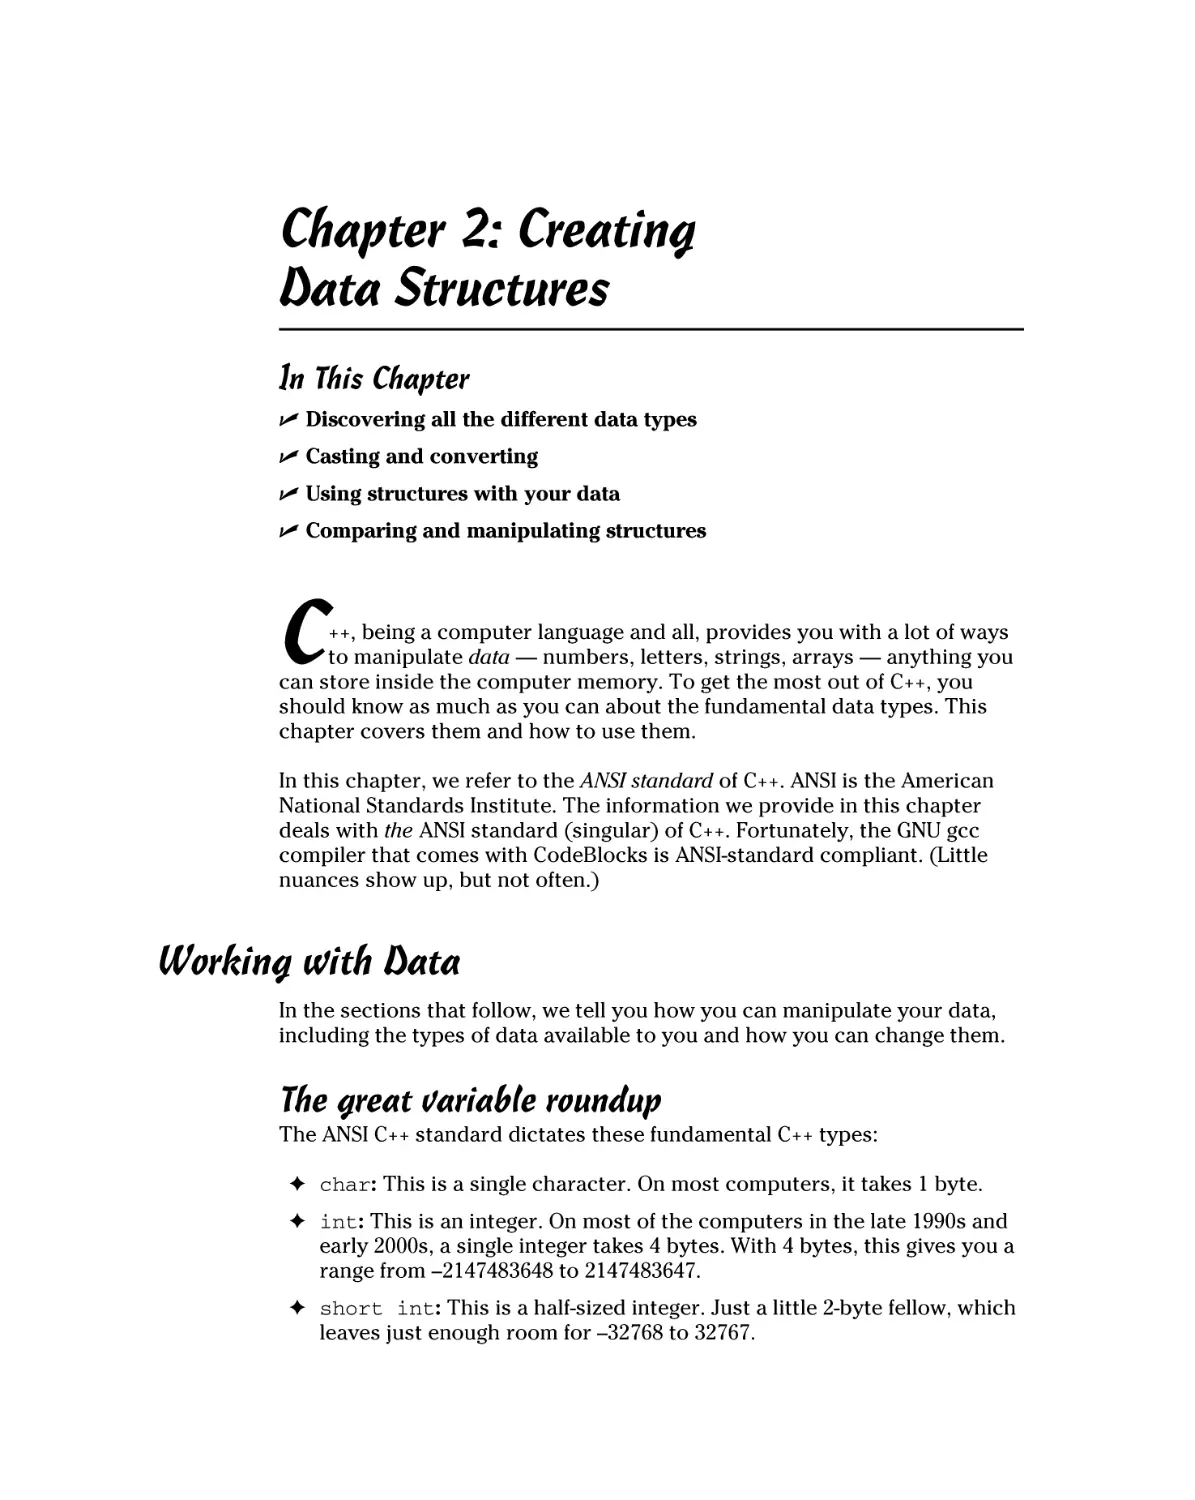 Chapter 2
Working with Data